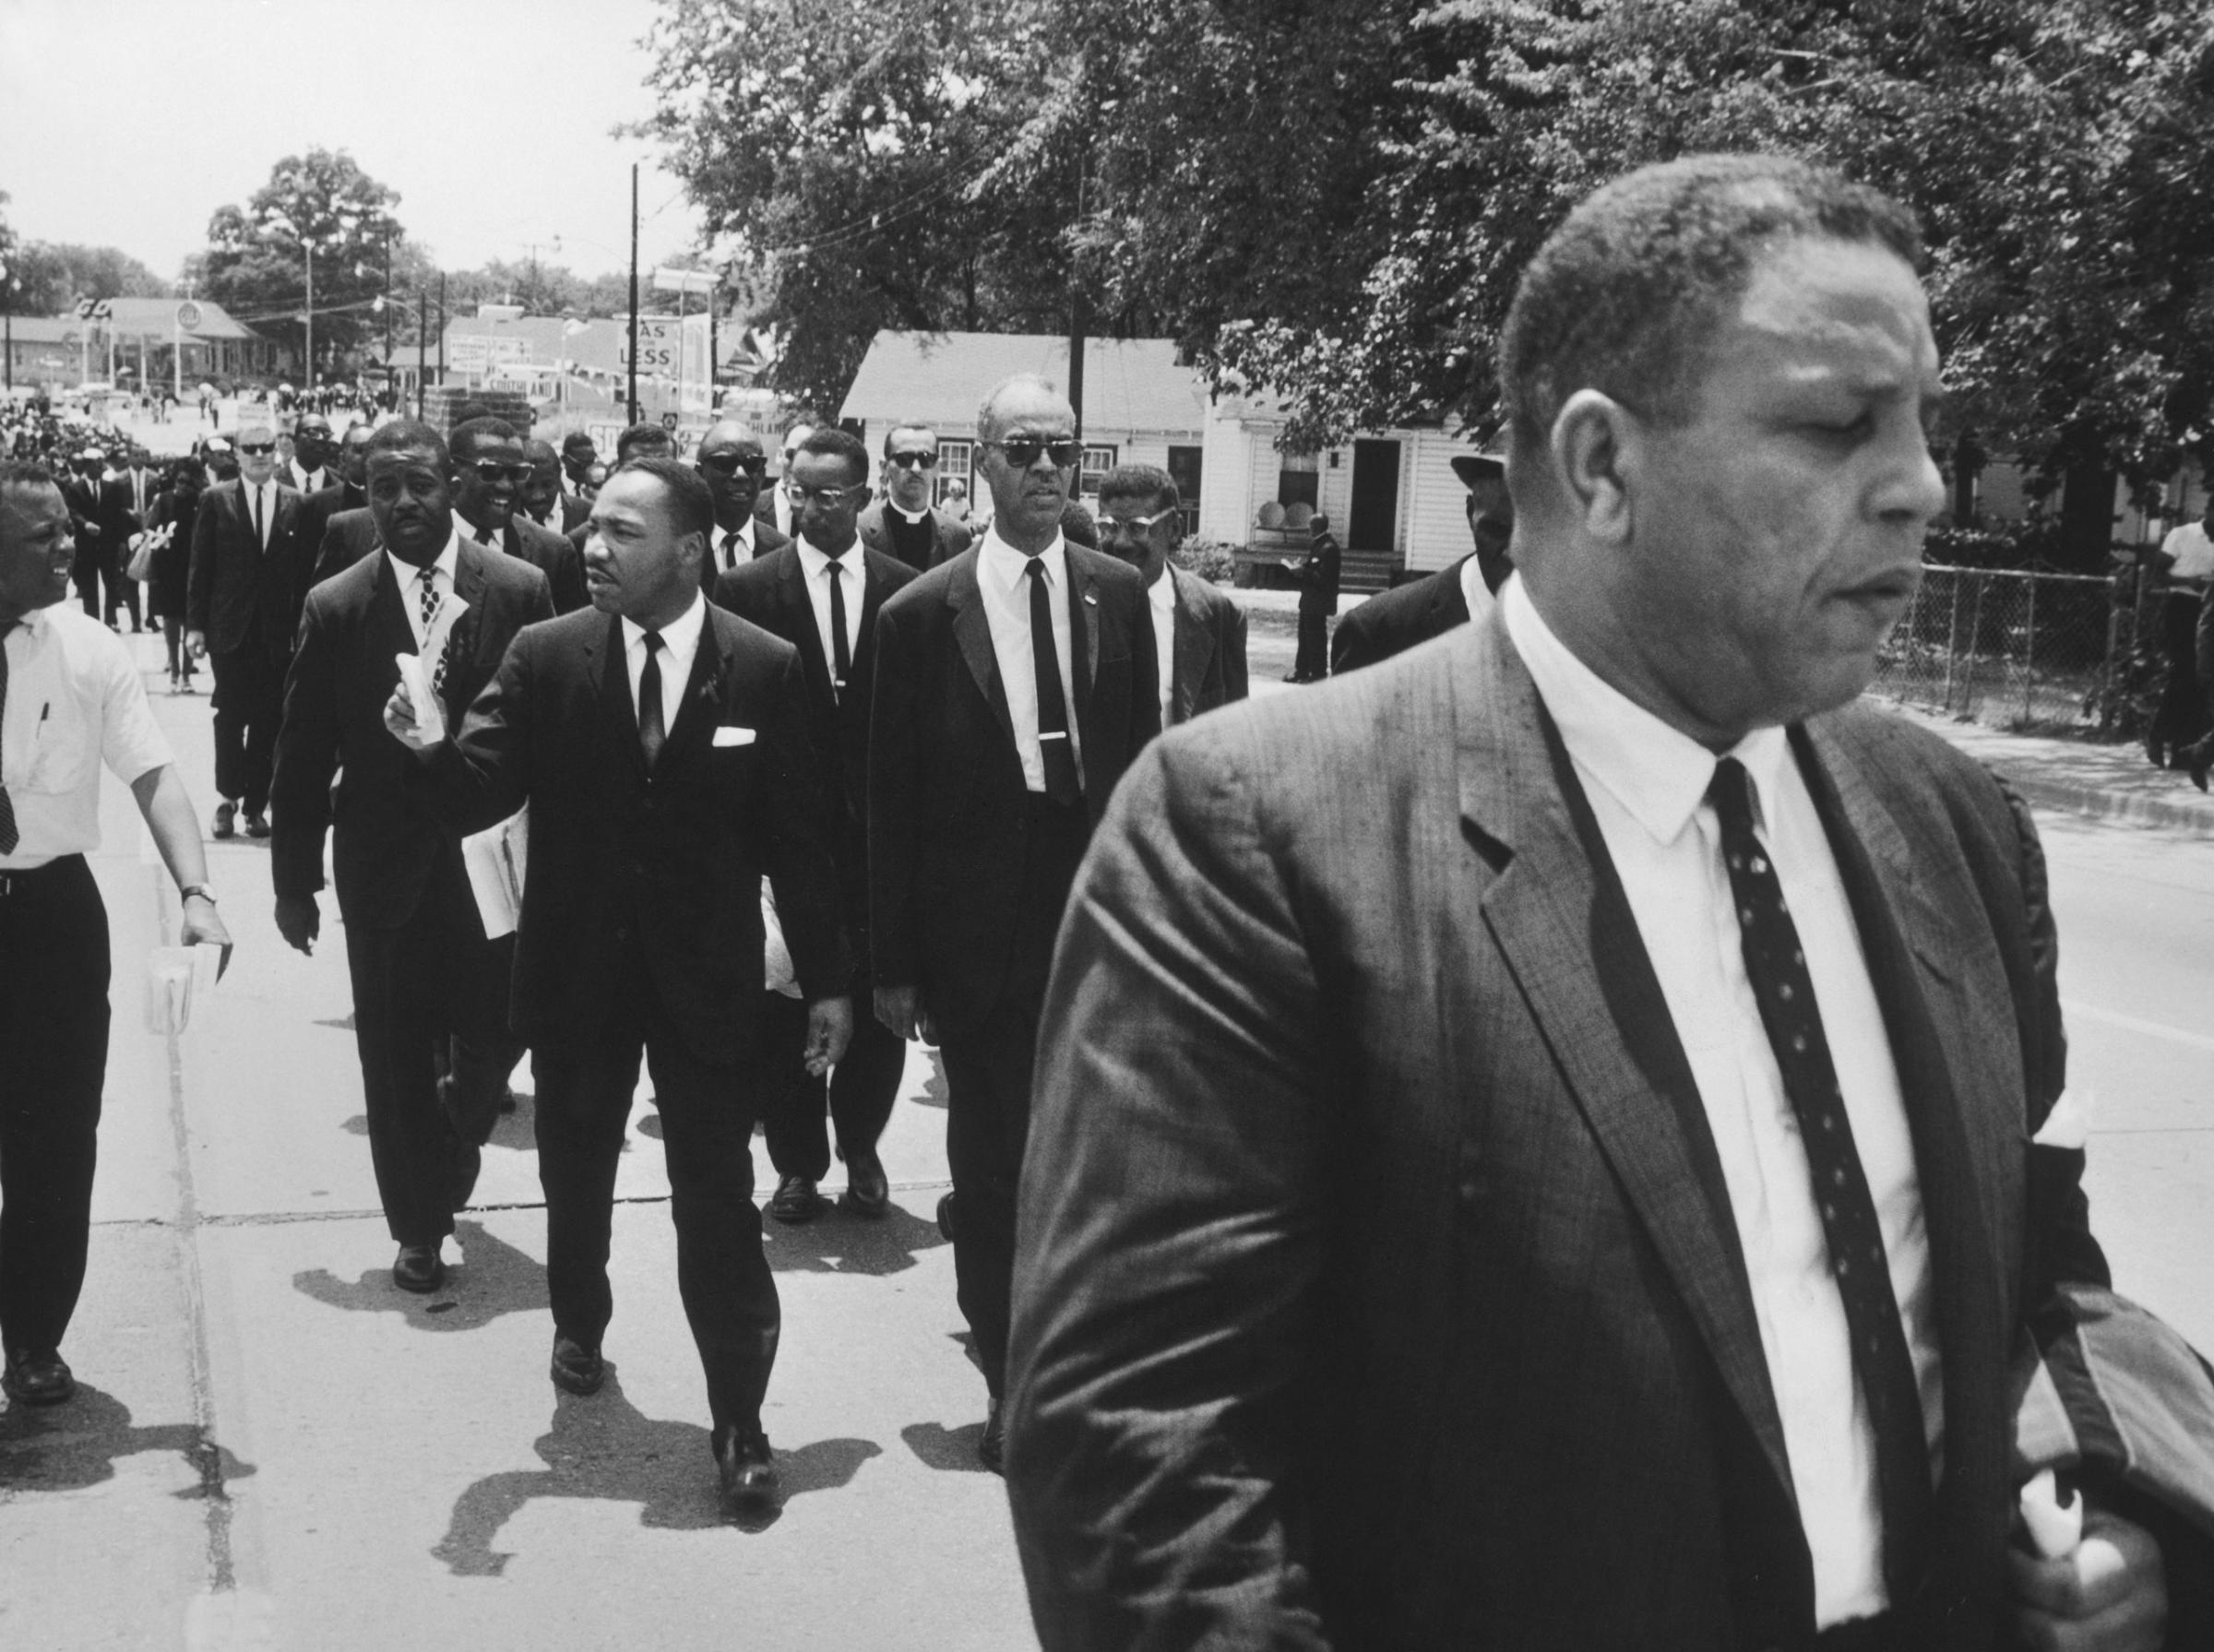 Martin Luther King, Jr., Ralph Abernathy and other civil rights leaders walk in Medgar Evers' funeral procession, Jackson, Miss., June 15, 1963.